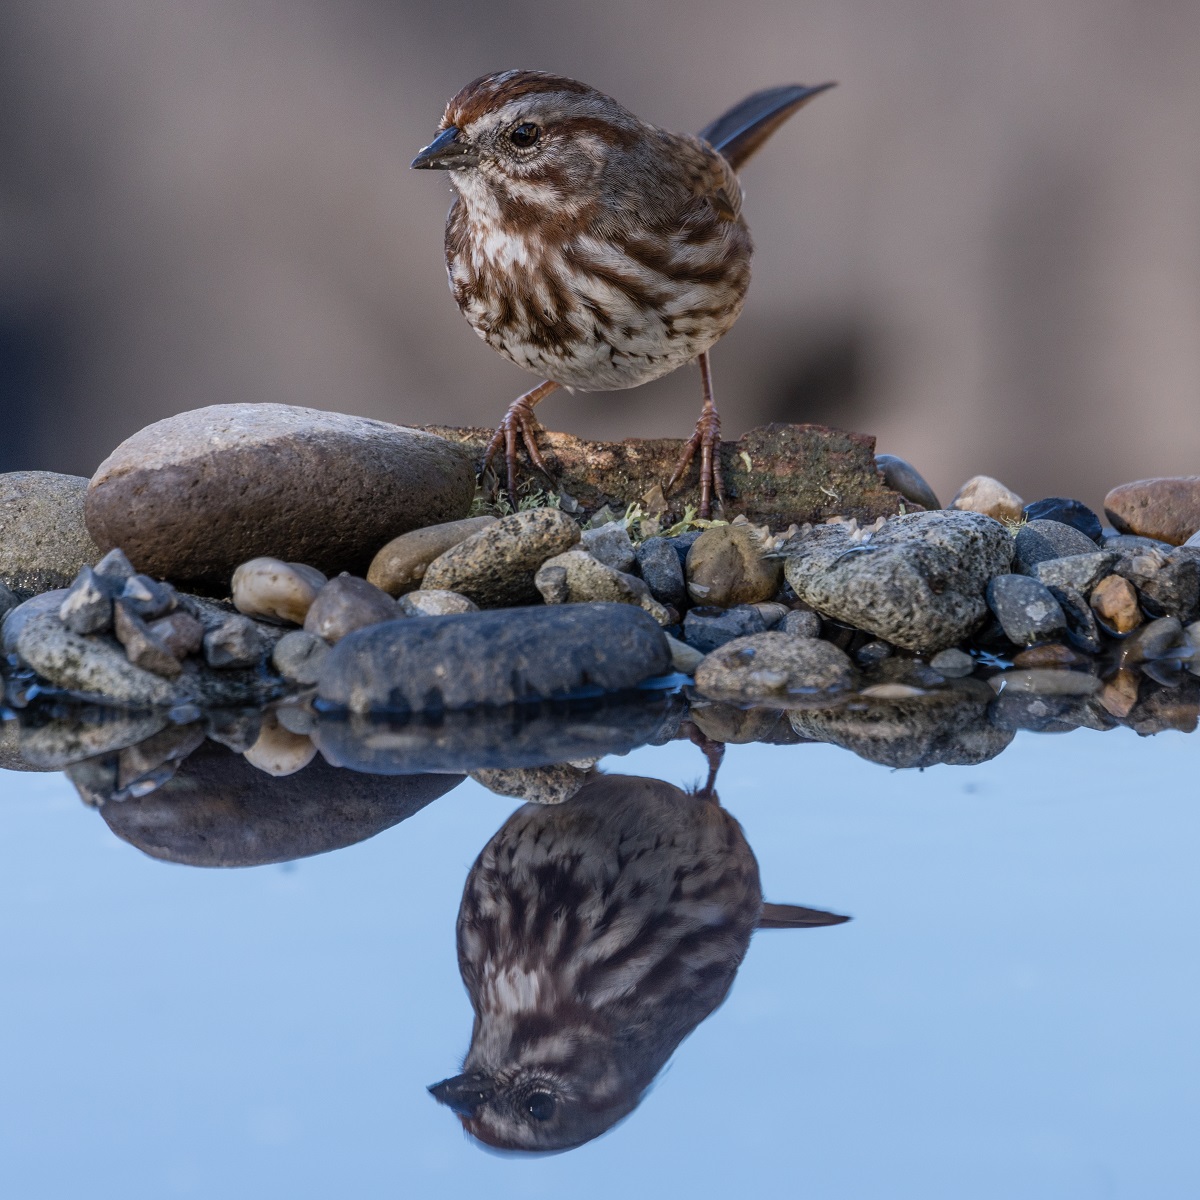 Song sparrow sees reflectionn